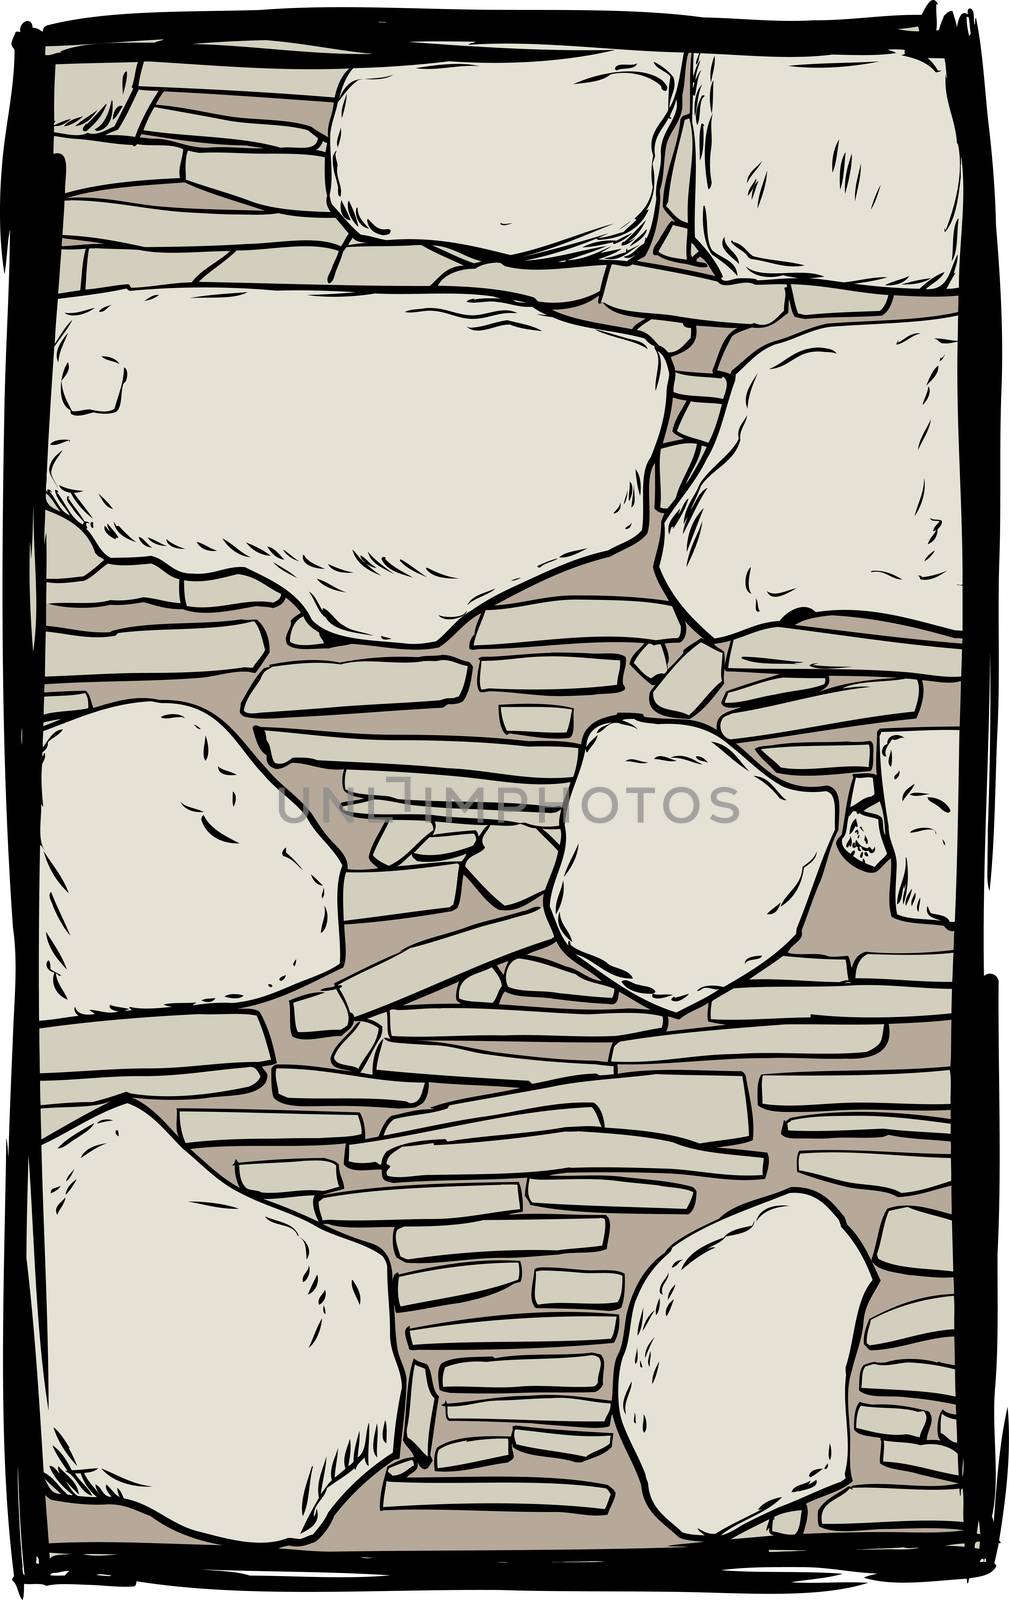 Old stone and dirt filled wall inside sketched frame